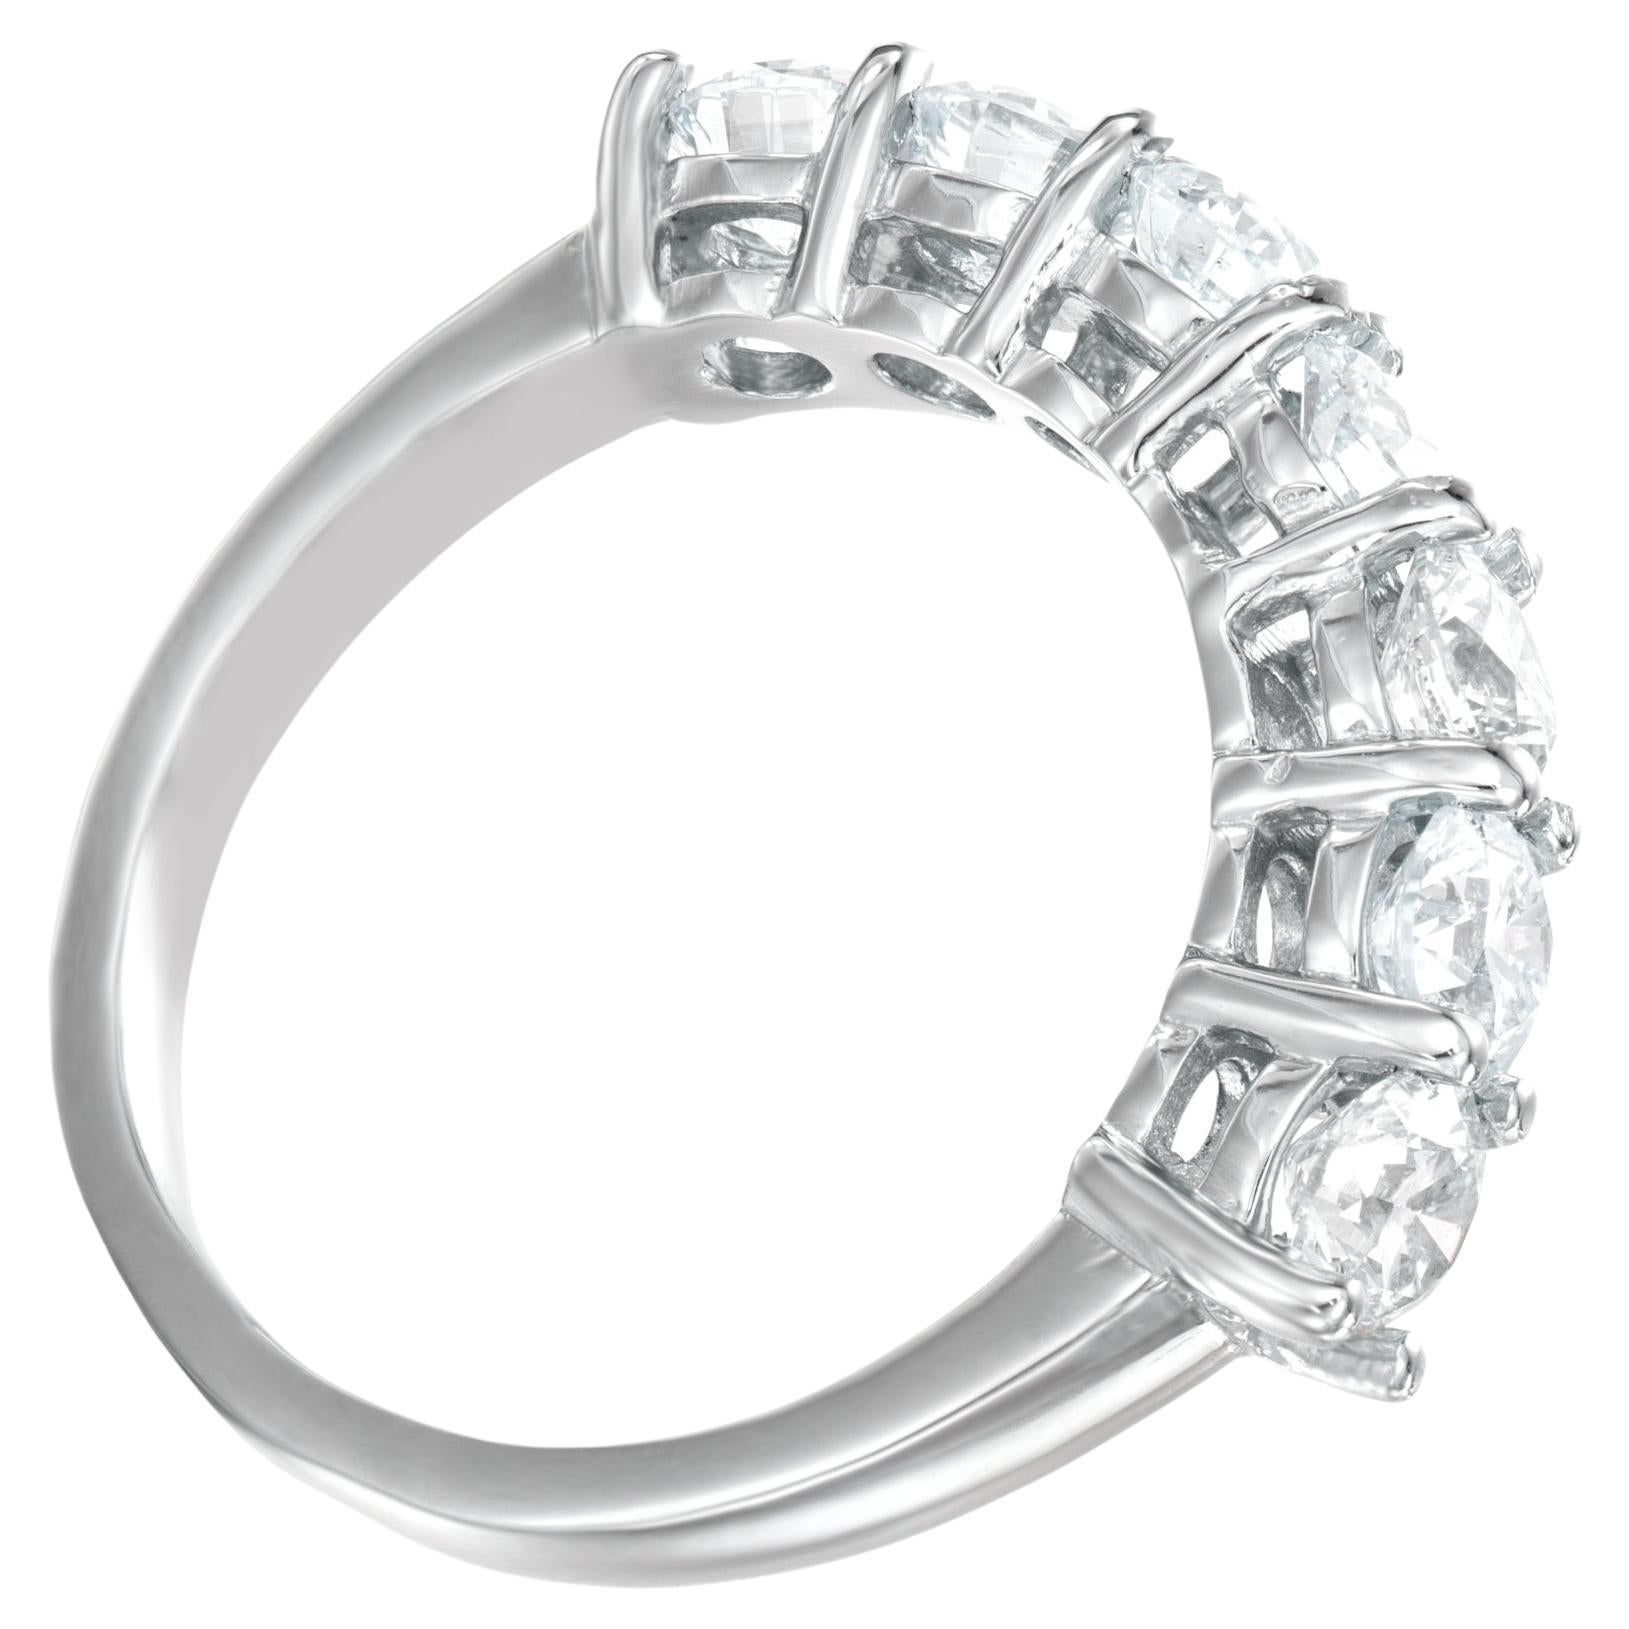 This stunning half eternity band is crafted in solid 18K white gold; features 7 diamonds graded in F-G color and VS in clarity.
The total carat weighs is 1.80
The ring is resizable upon request.